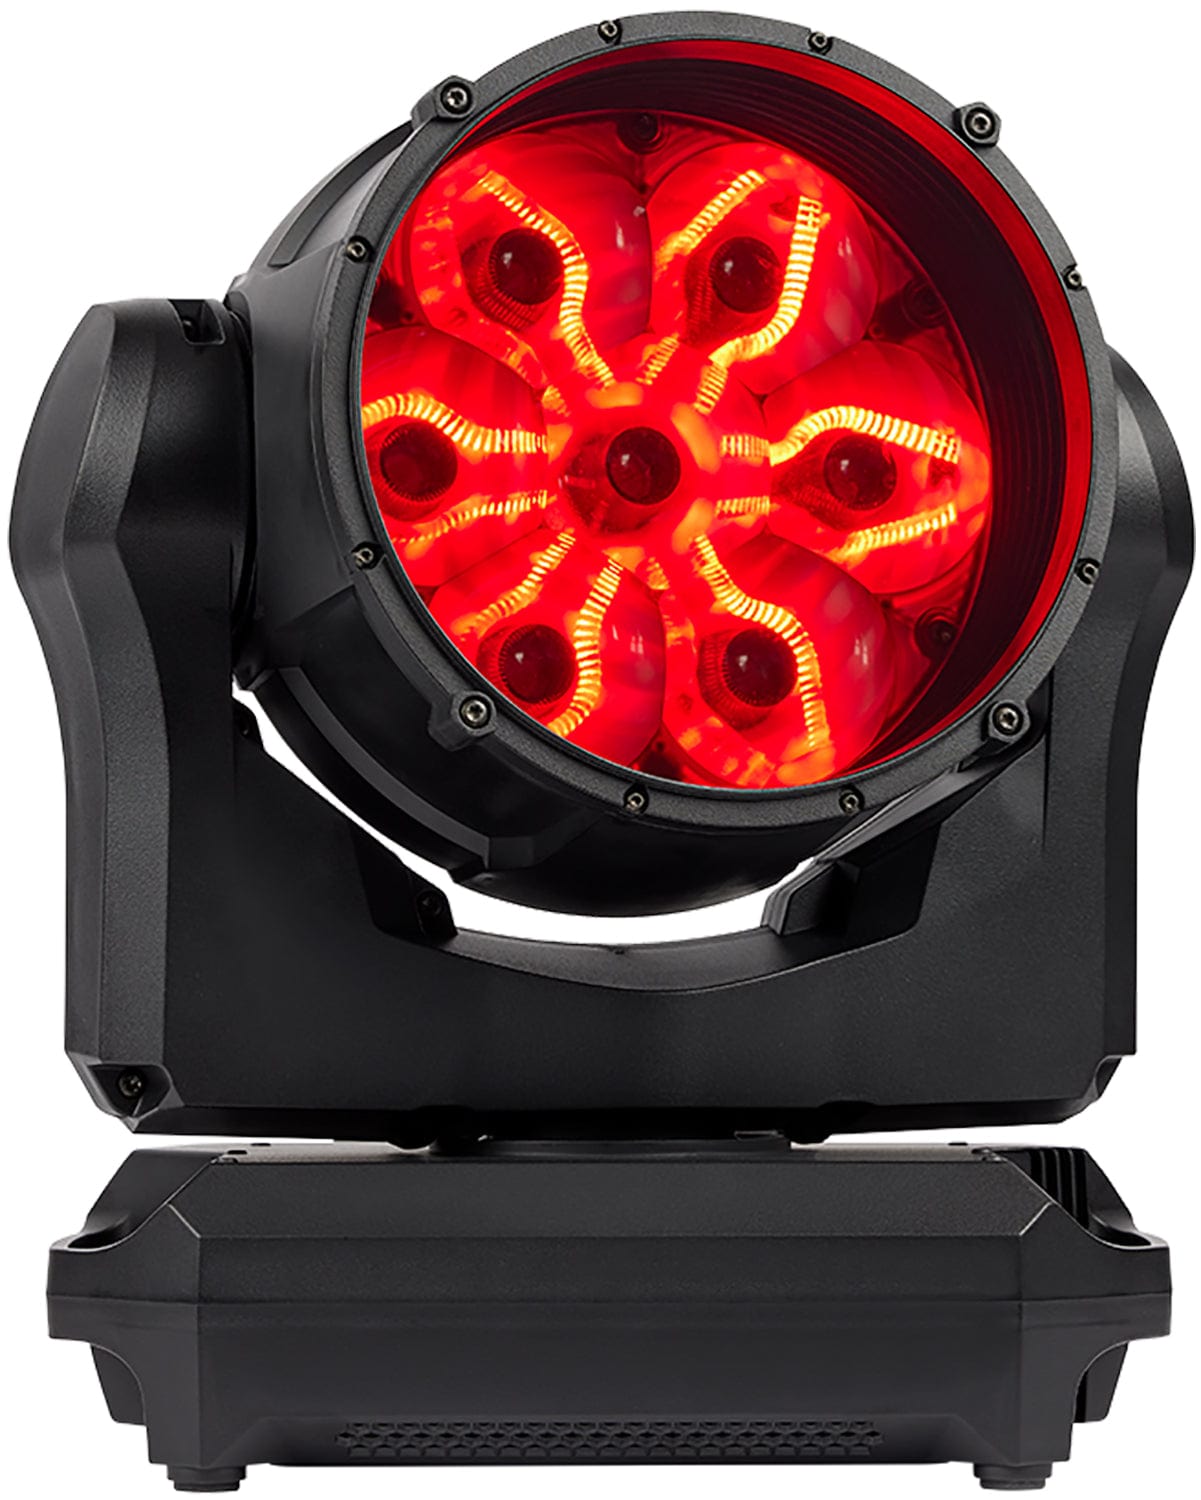 Martin MAC Aura XIP Moving Head Wash Light (in EPS) - PSSL ProSound and Stage Lighting